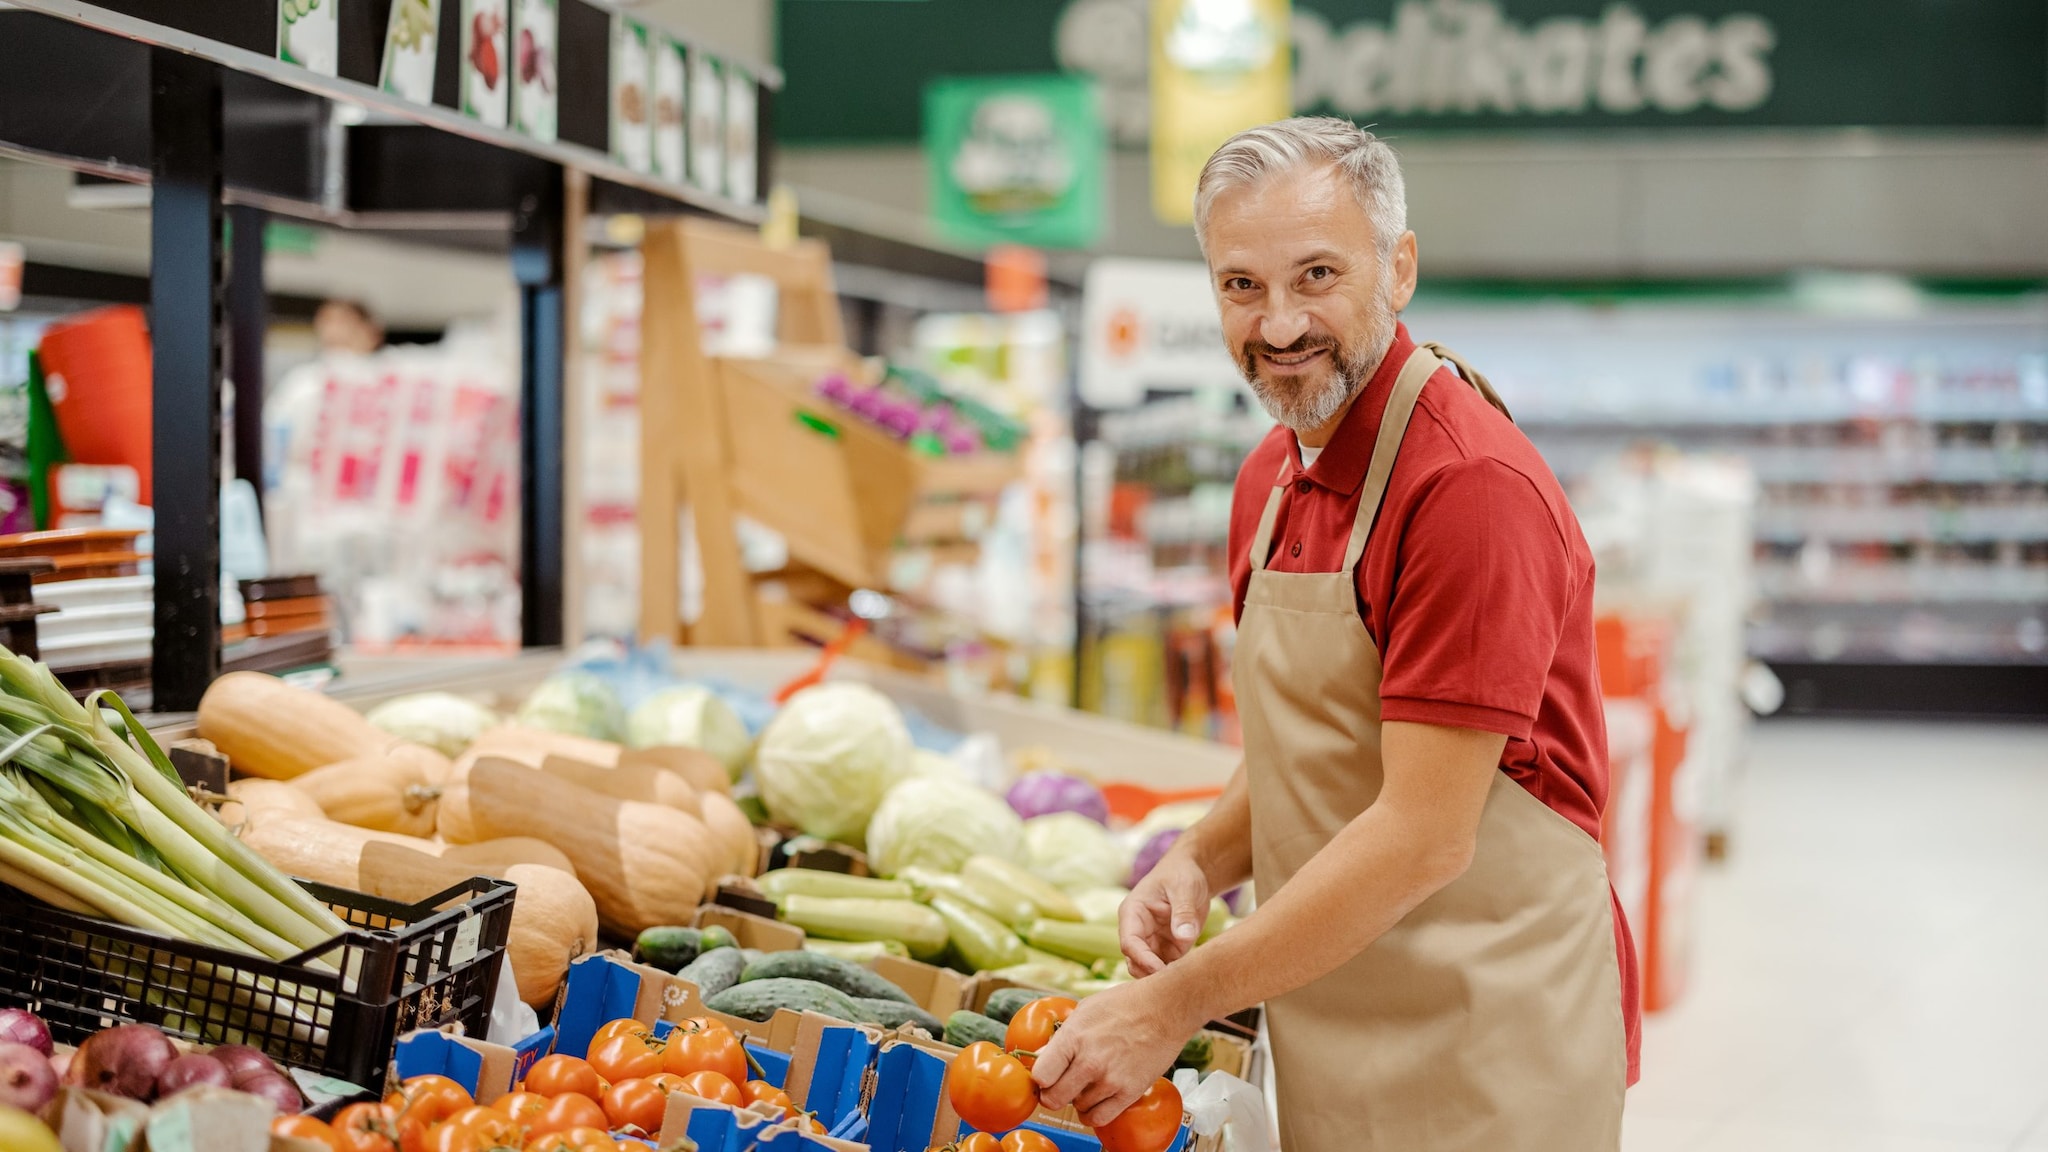 Male grocery store attendant near produce section